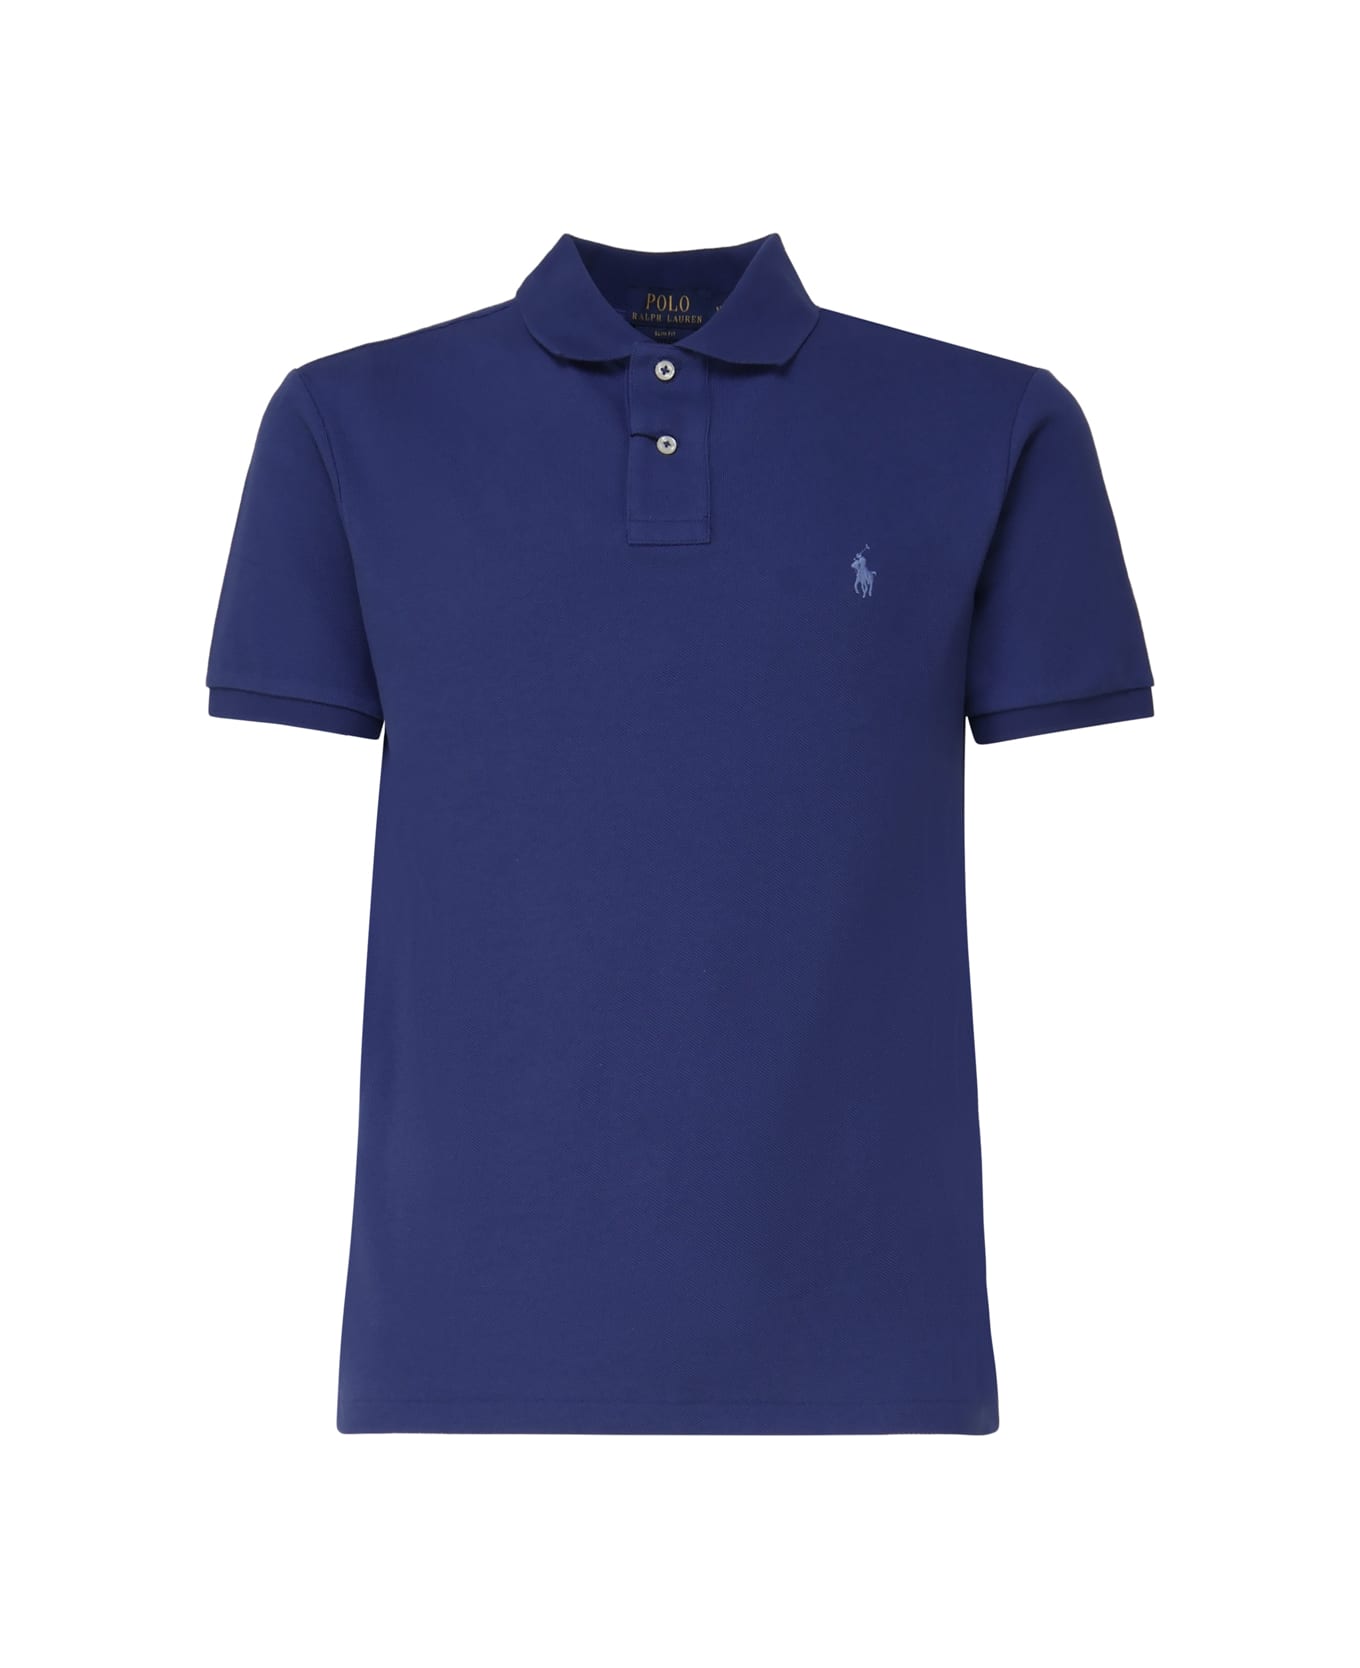 Polo Ralph Lauren Polo Shirt With Embroidery Polo Shirt - BLUE ポロシャツ